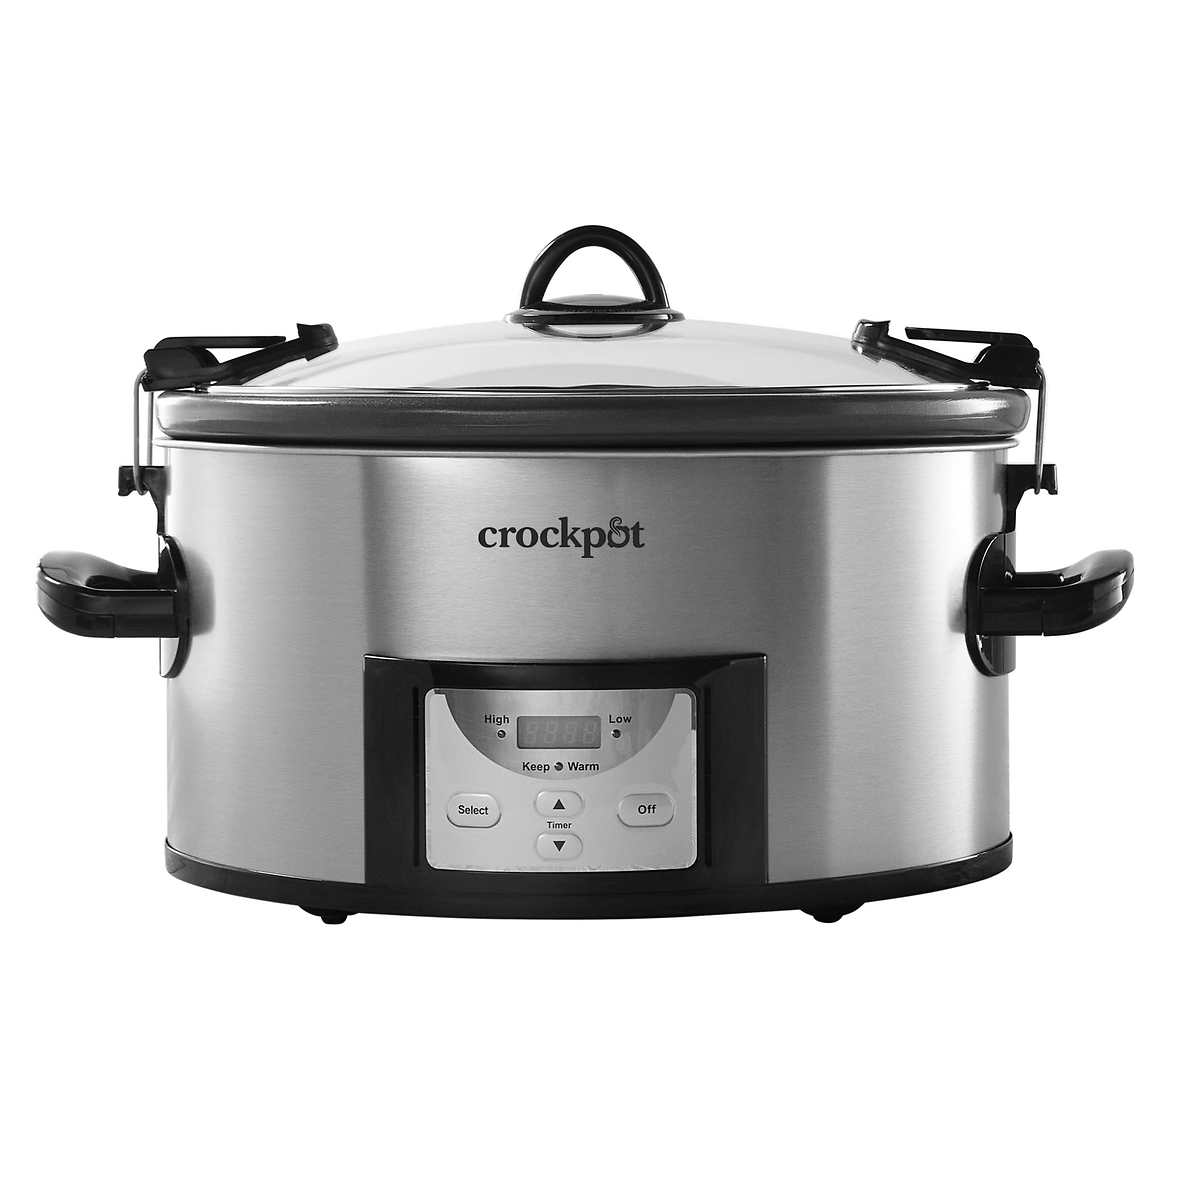 How much electricity does a crock pot use on low Crock Pot 7 Quart Easy Clean Slow Cooker With Locking Lid Costco